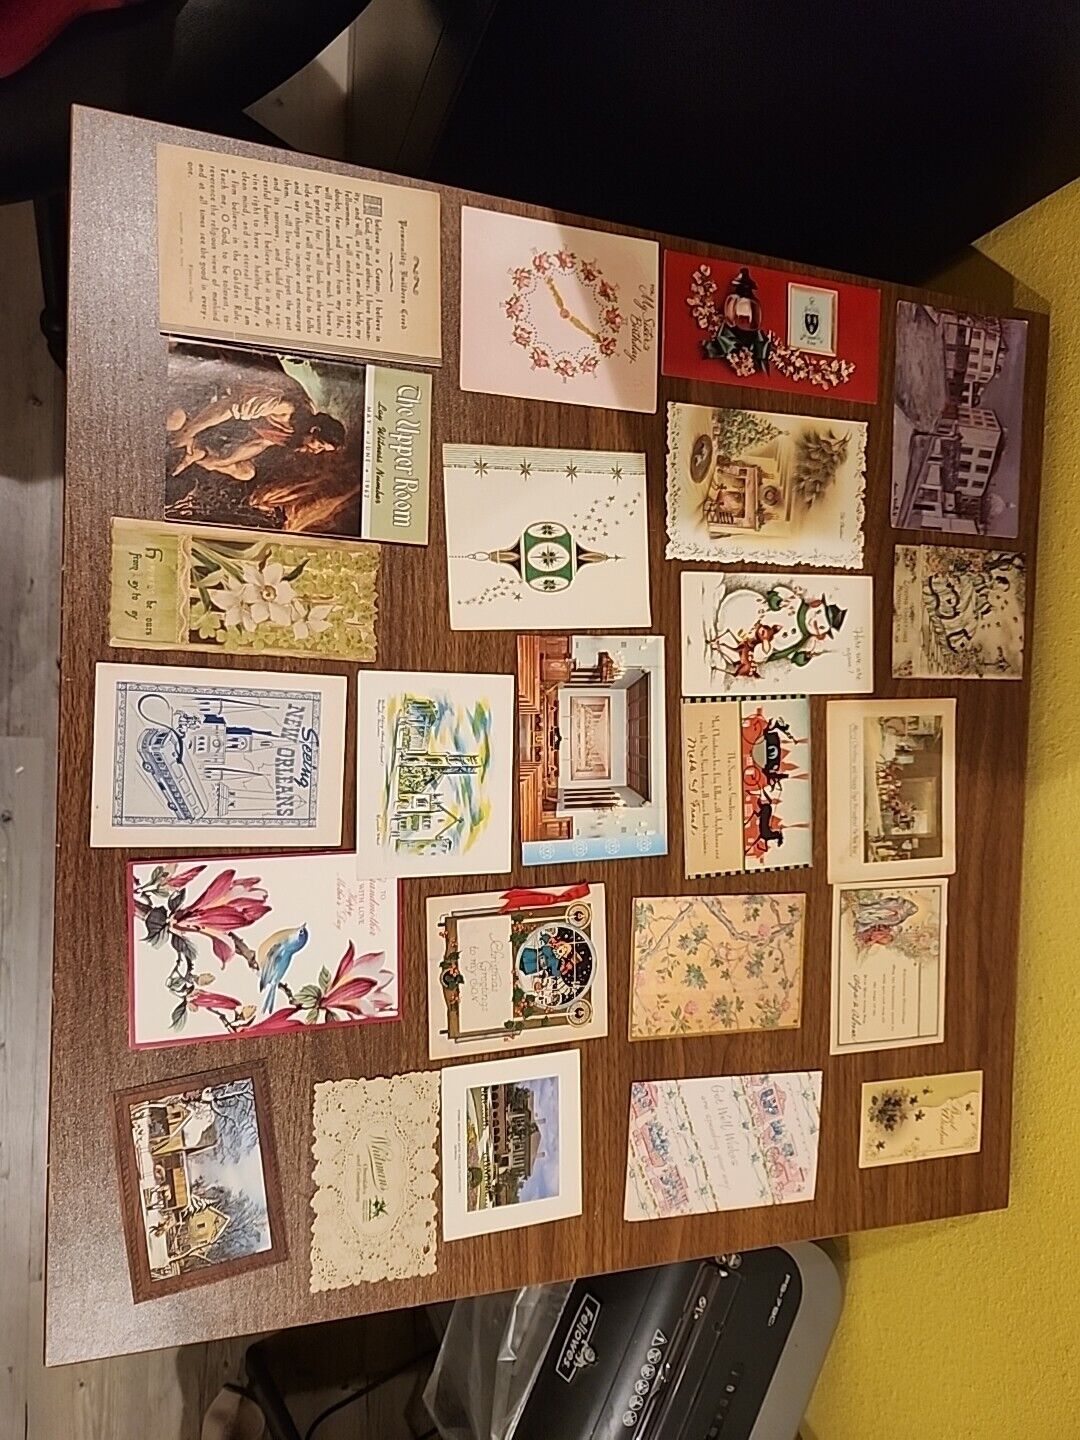 Lot of vintage greeting cards and miscelaneous paper good.